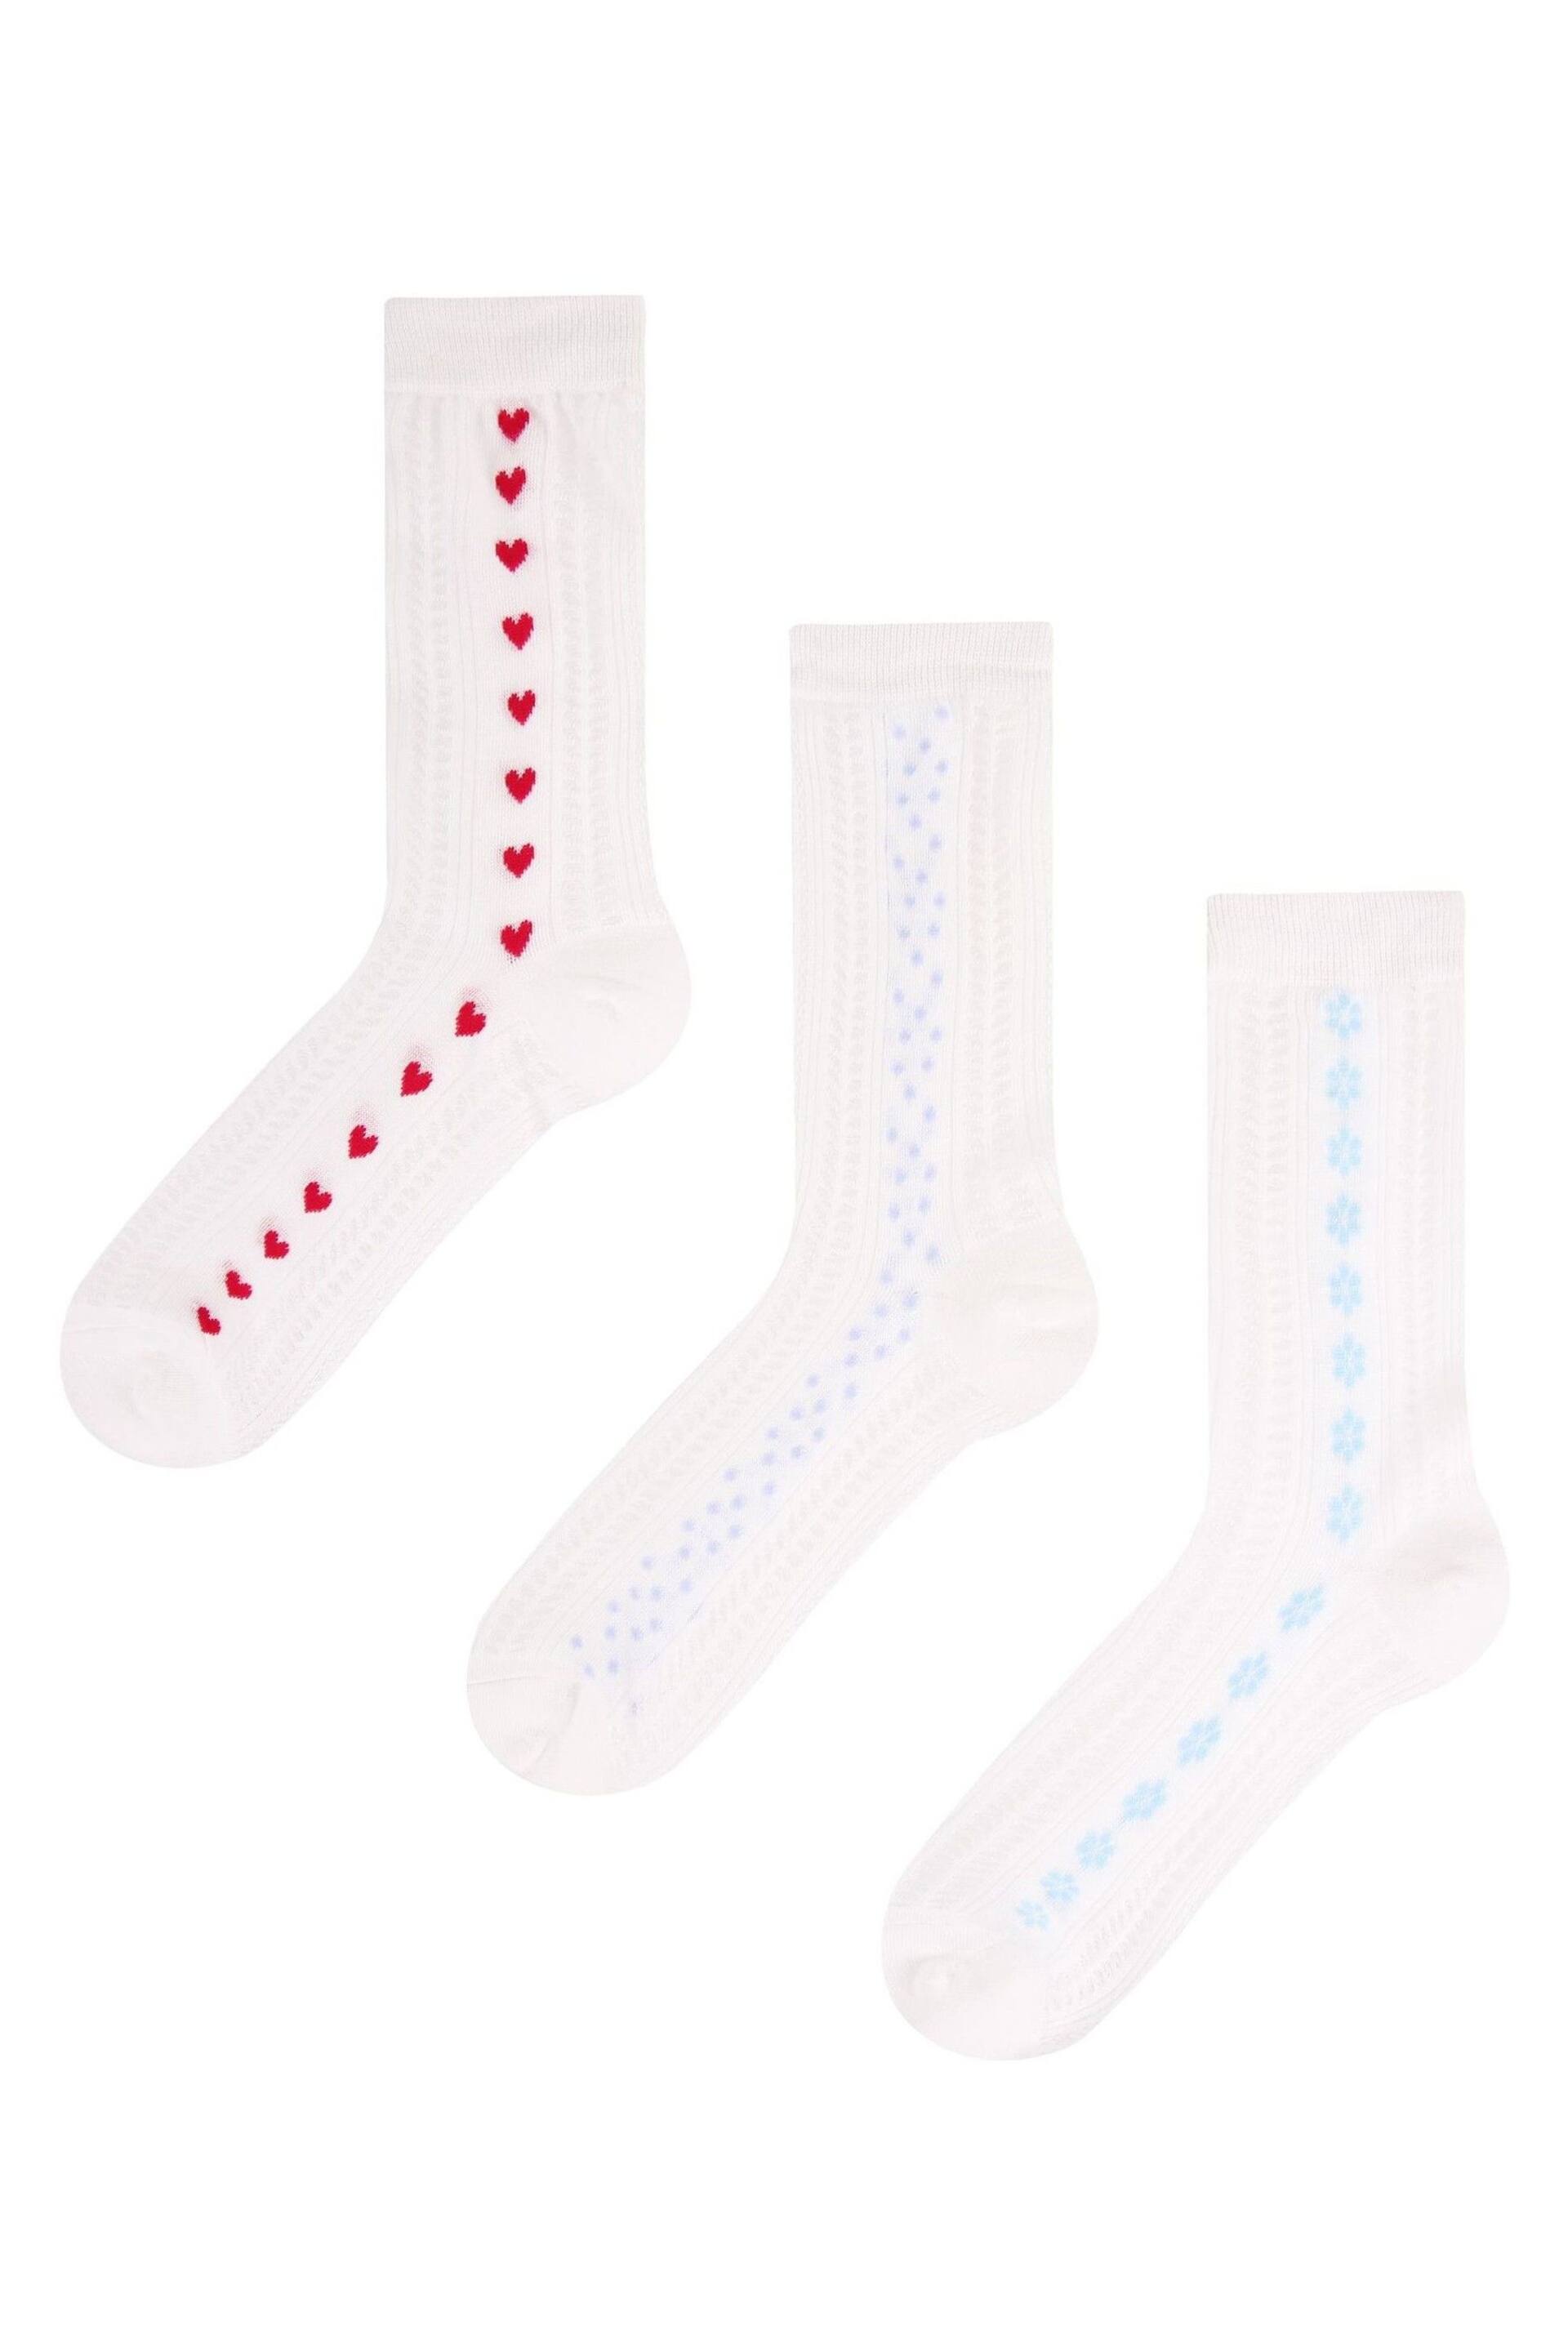 Wild Feet White Cropped Fancy Ankle Socks 3 Pack - Image 2 of 4